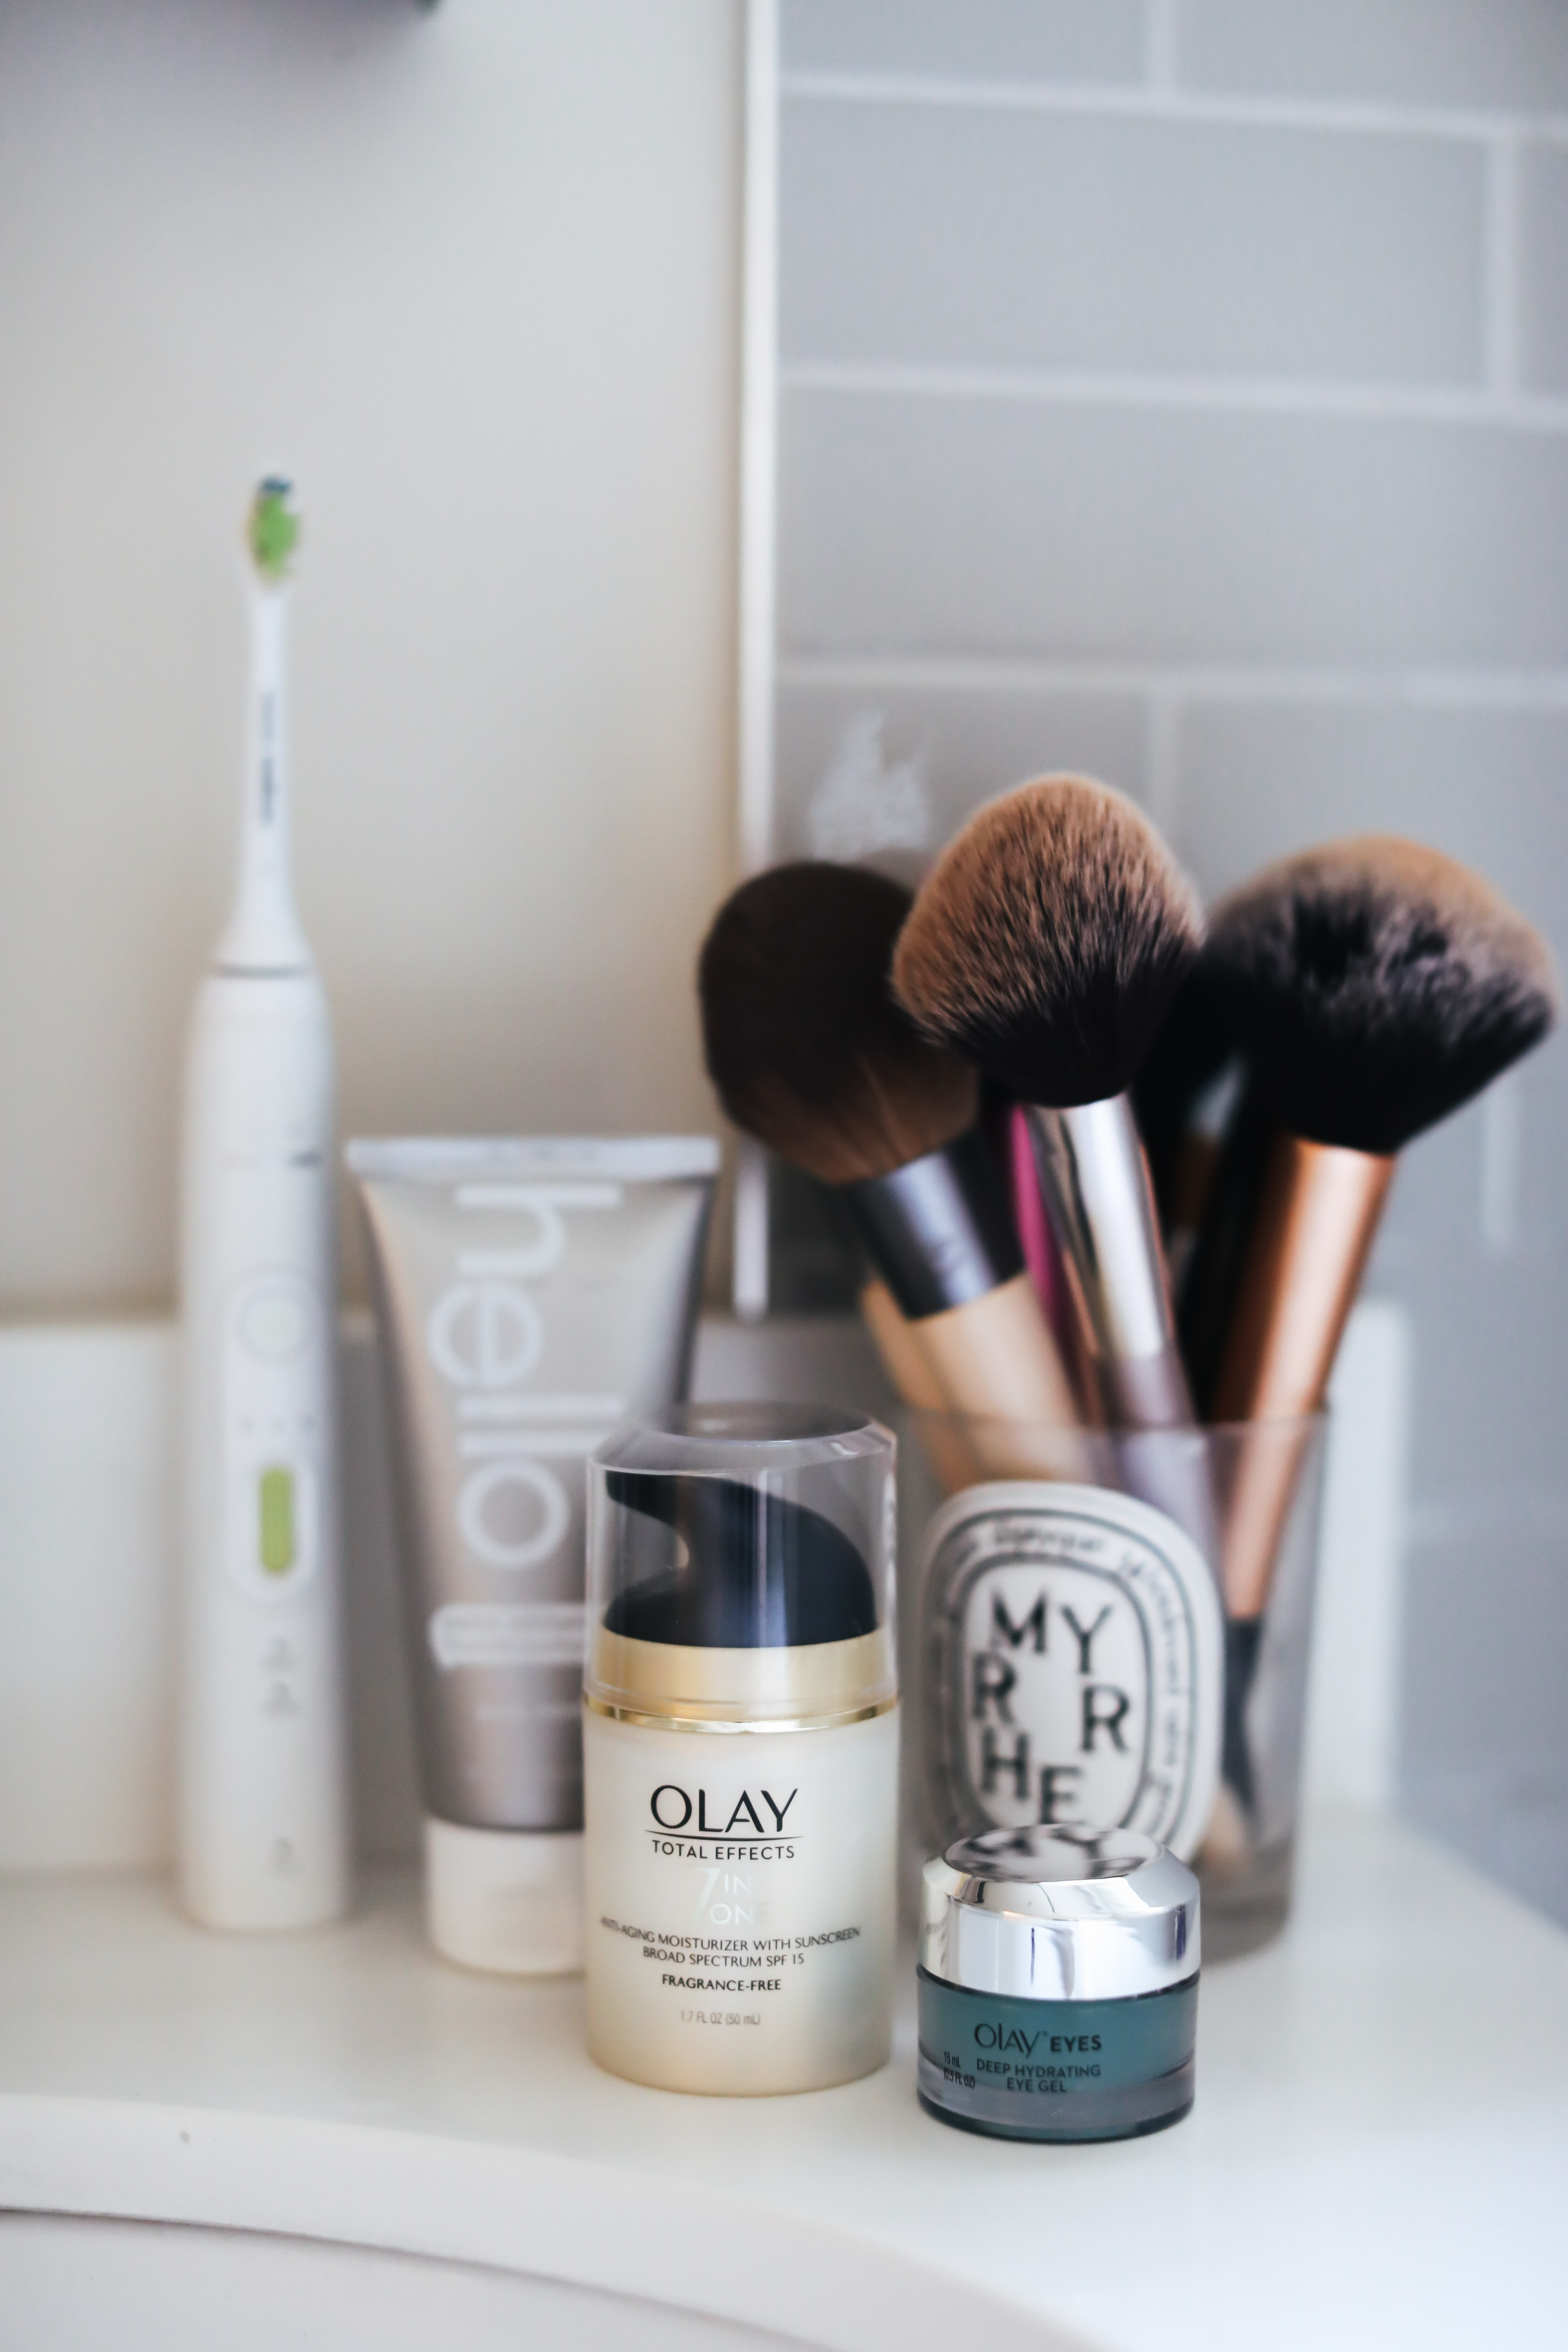 Challenge: Streamline Your Beauty Routine with OLAY #28Day Challenge.